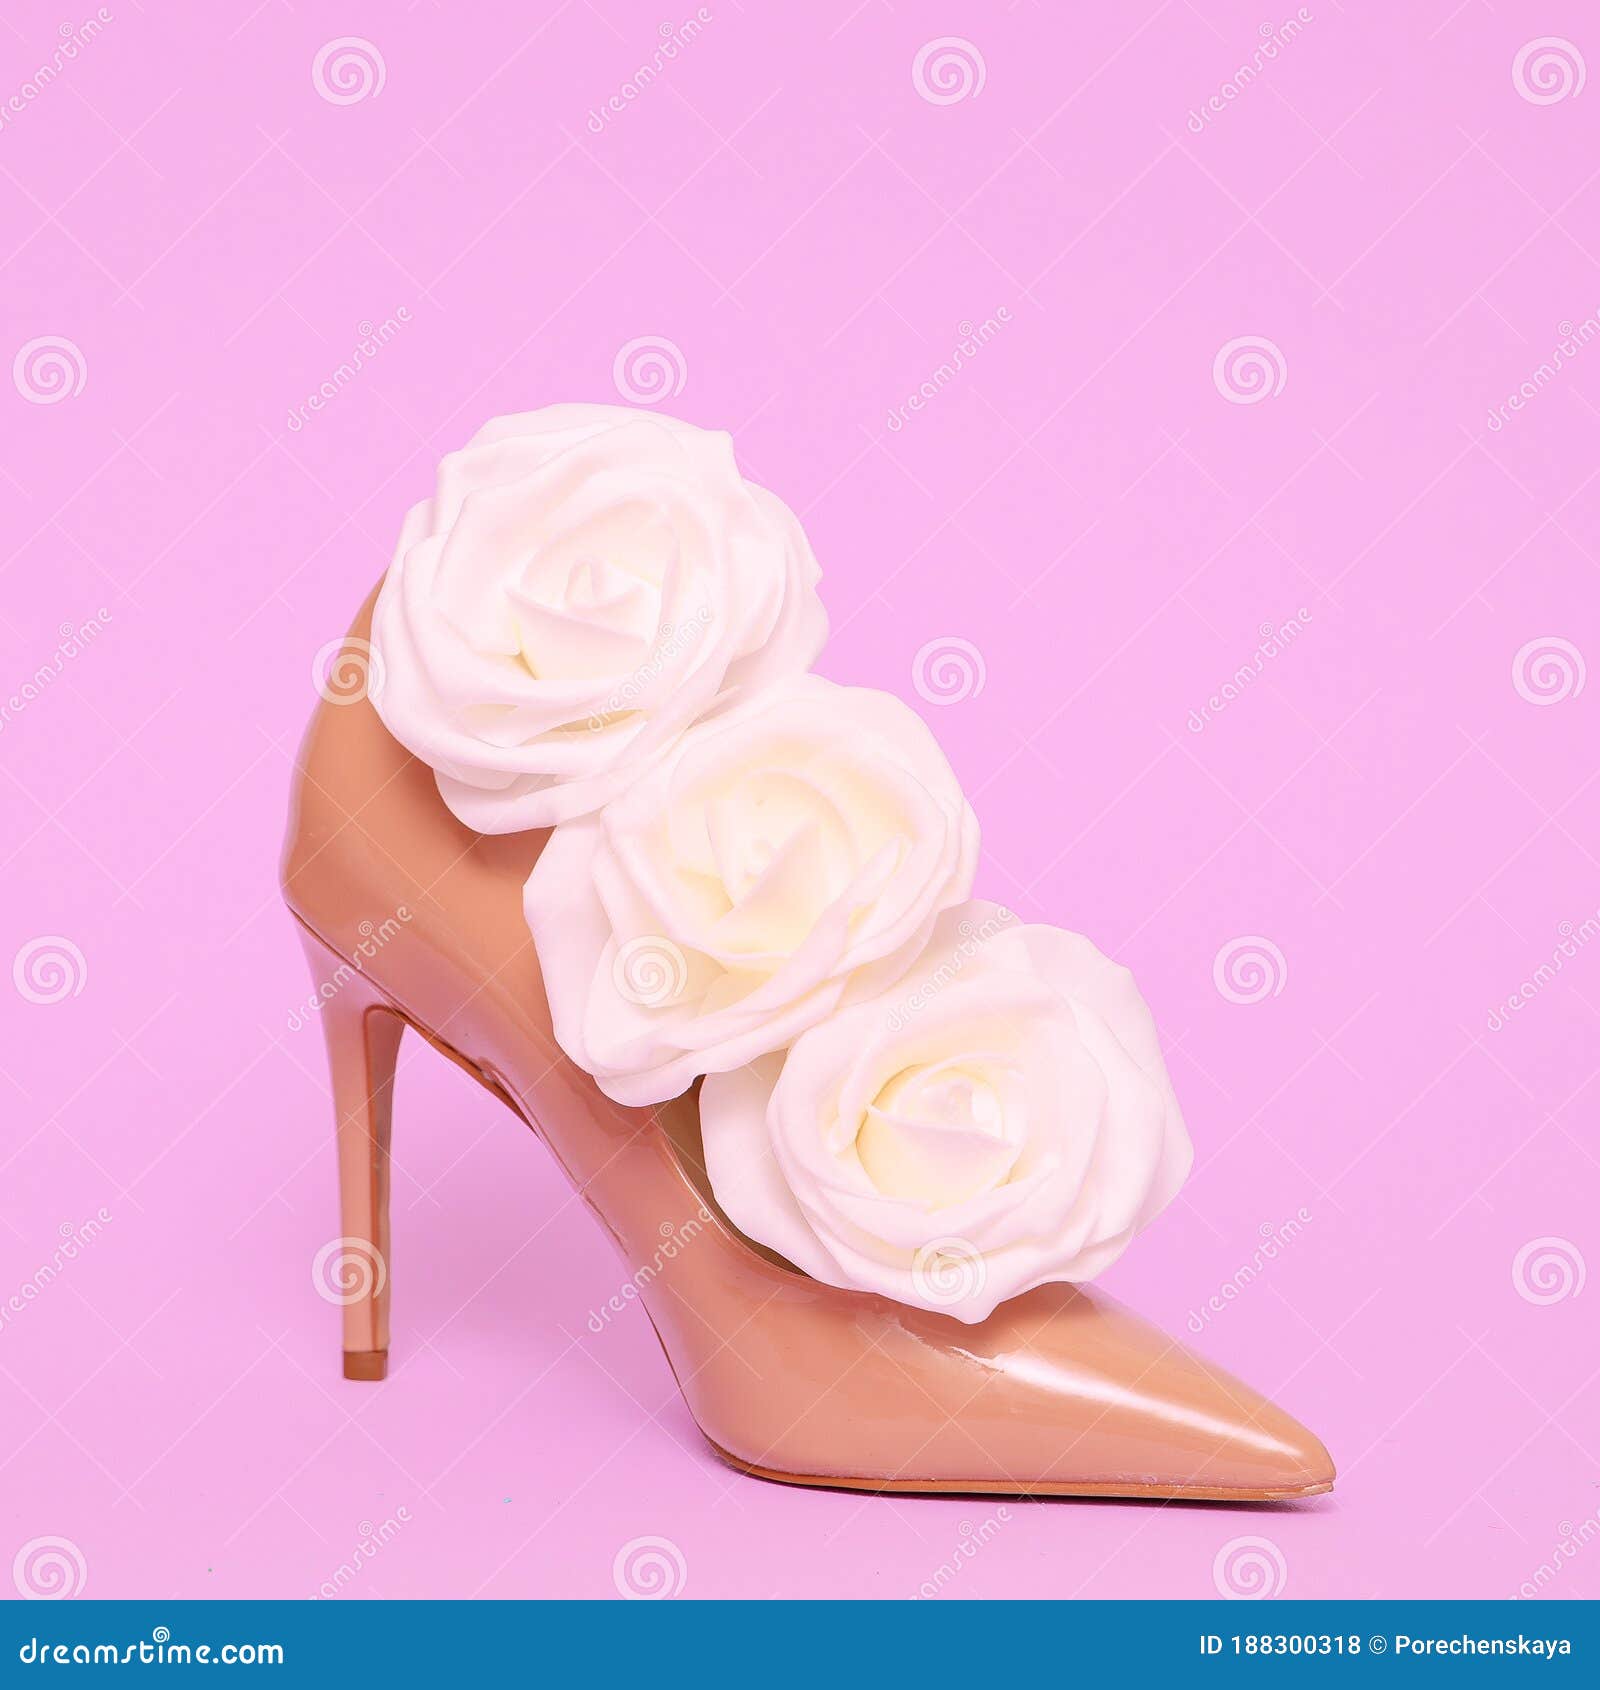 High Heel Shoes and White Roses. Lady Fashion Concept Stock Photo ...